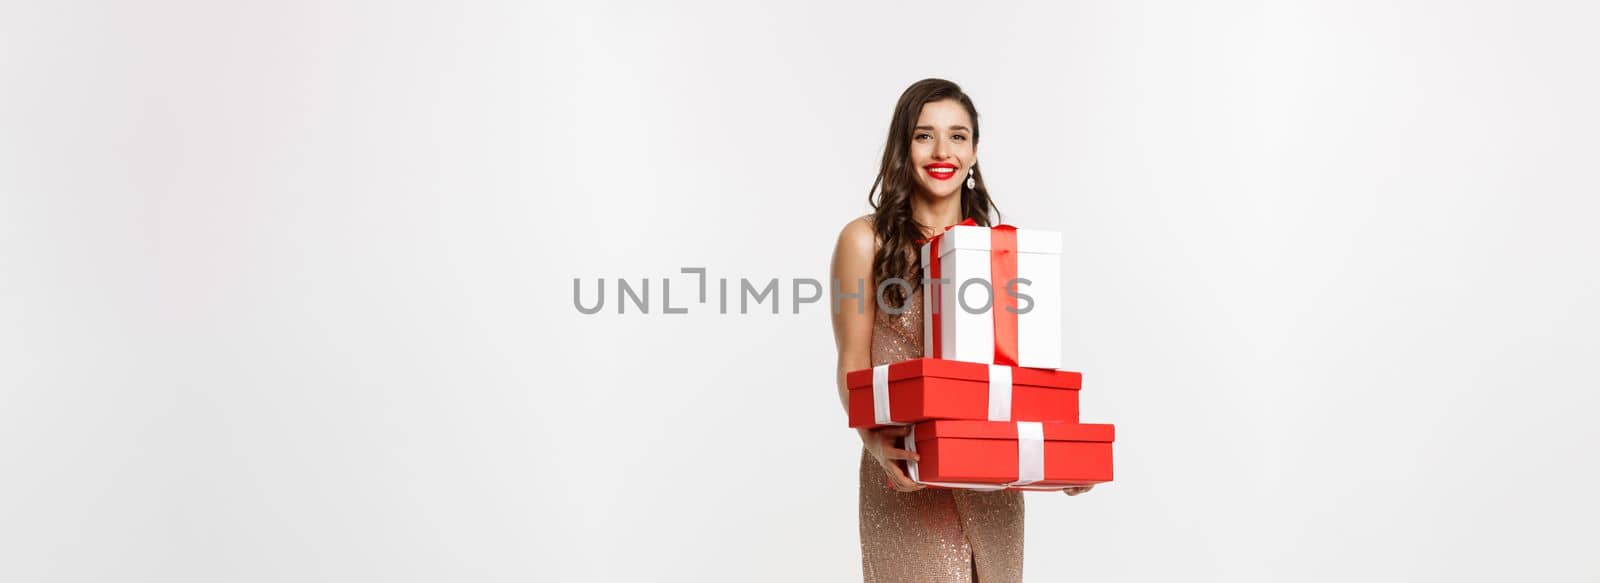 Christmas party and celebration concept. Full-length of stylish woman with red lips, glamour dress, holding gifts and smiling happy, standing over white background.